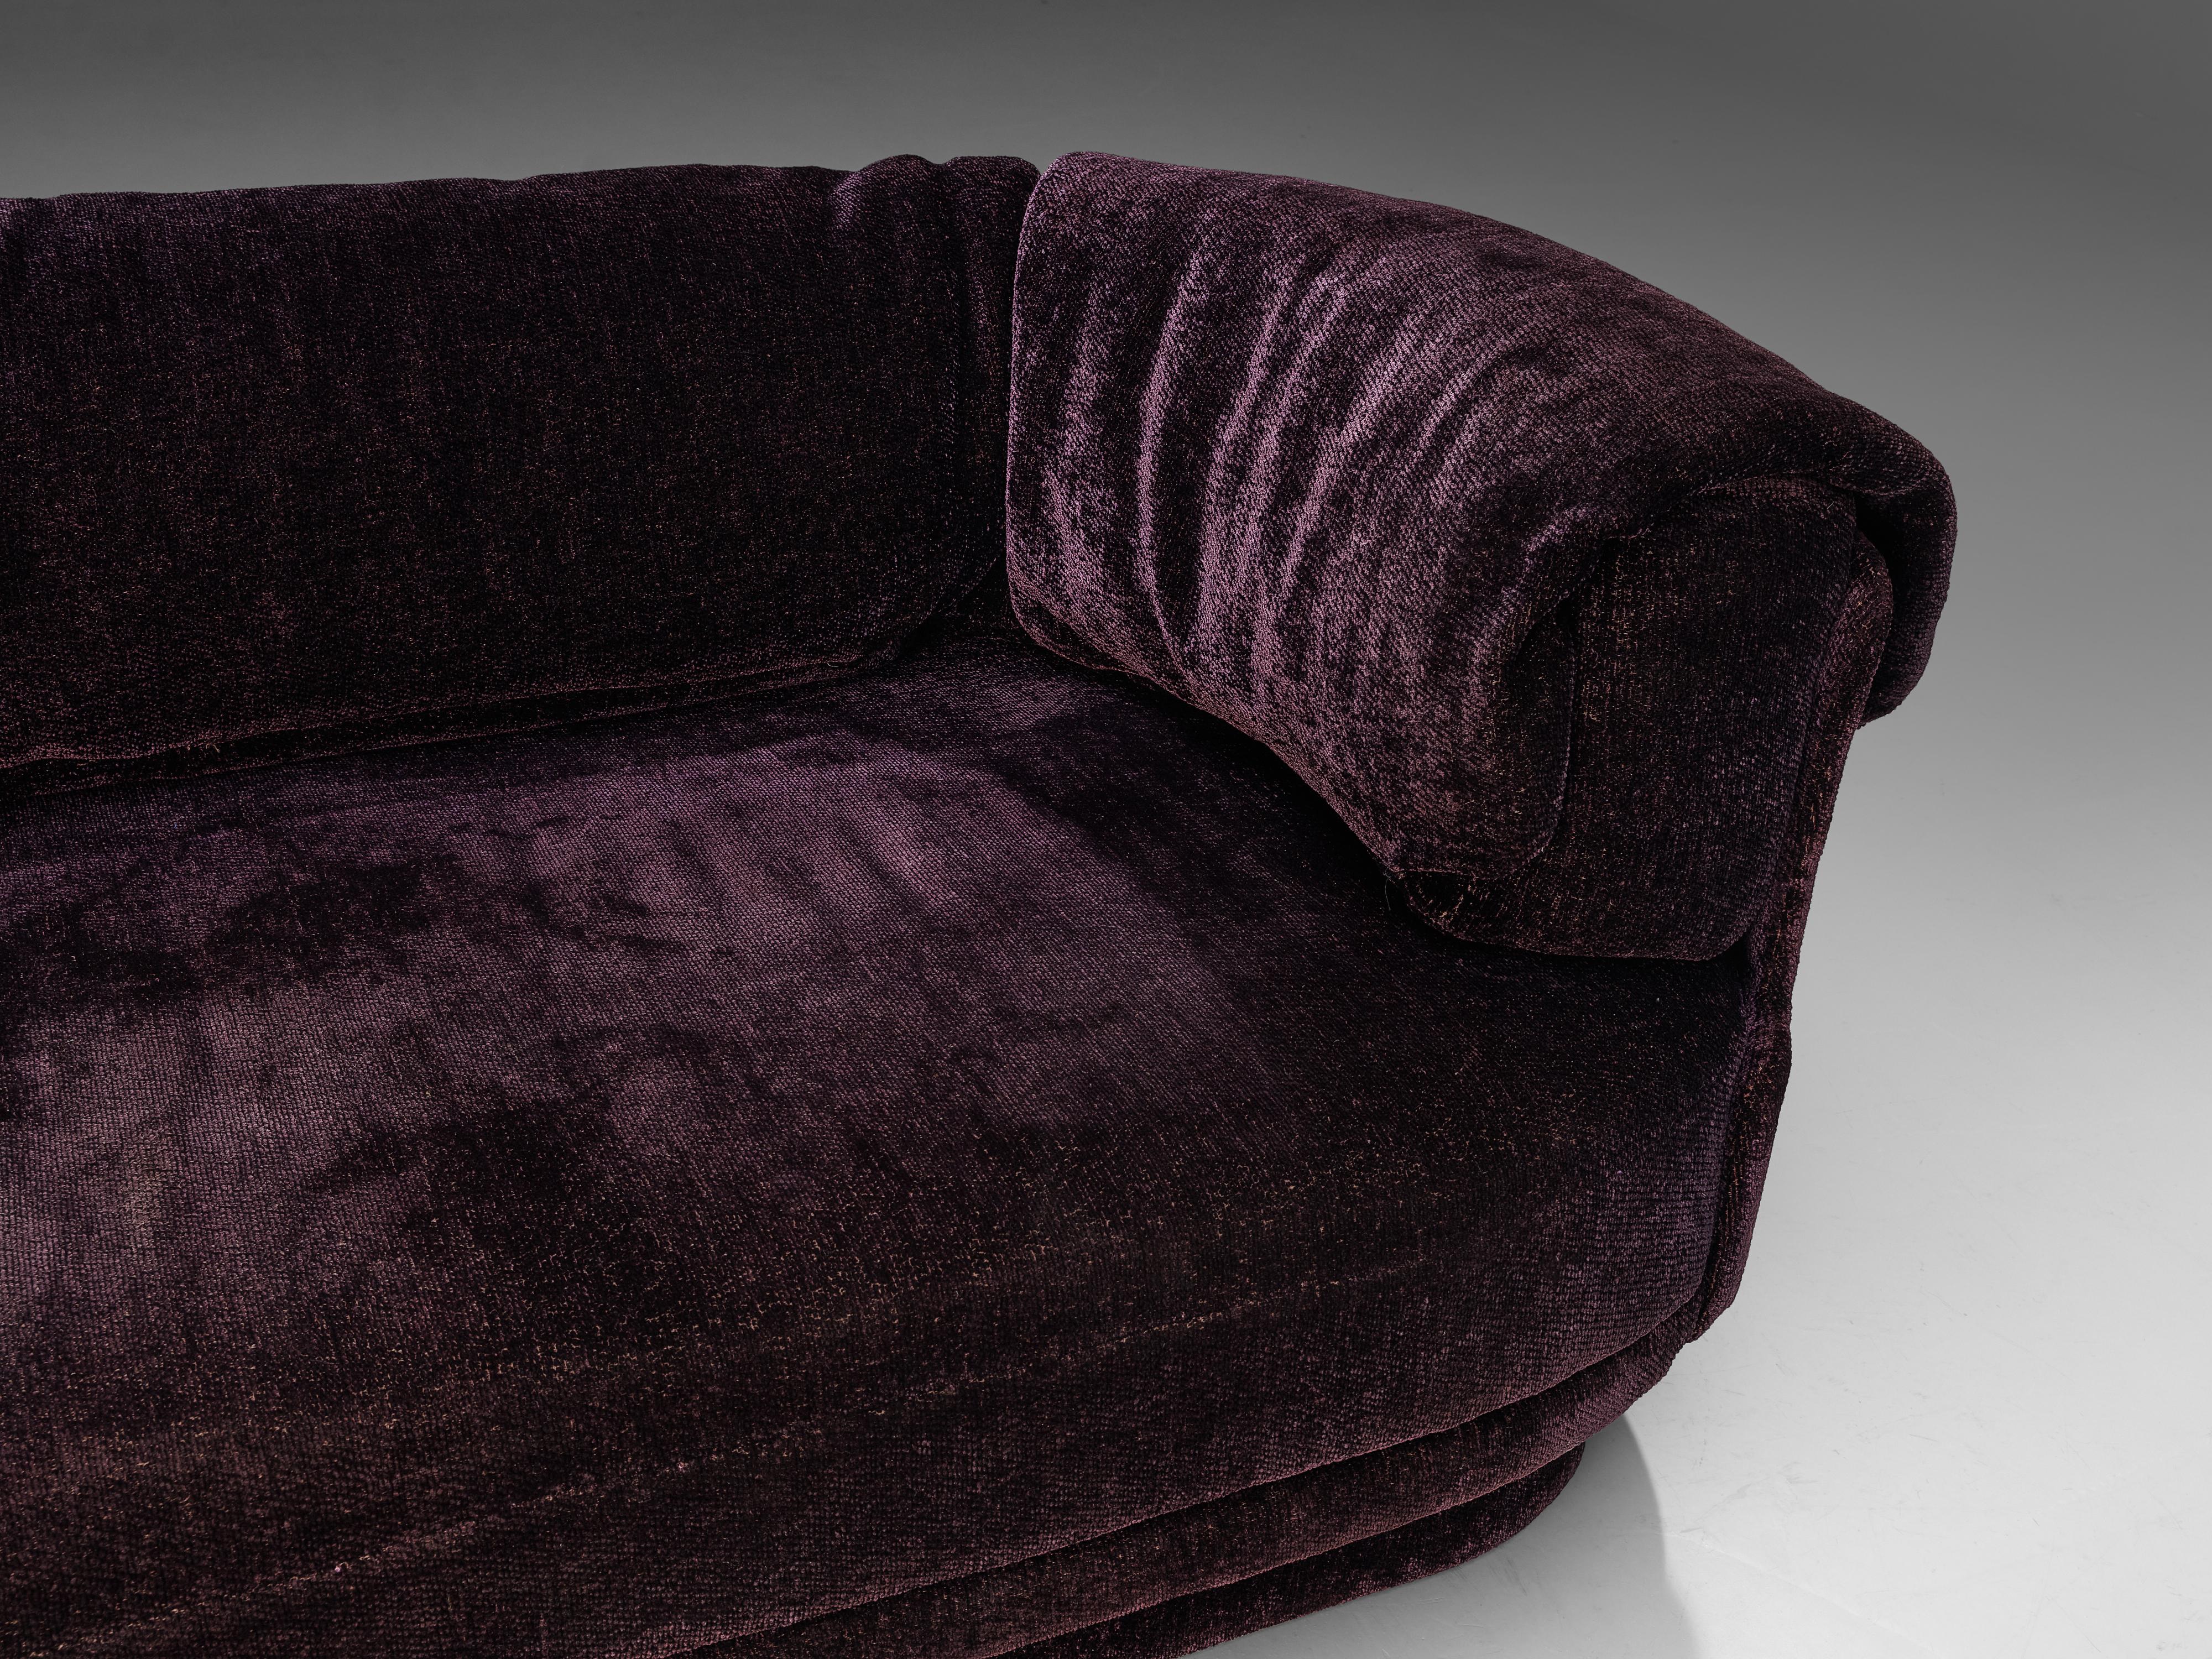 Late 20th Century Howard Keith Grand Sofa in Soft Purple Upholstery For Sale